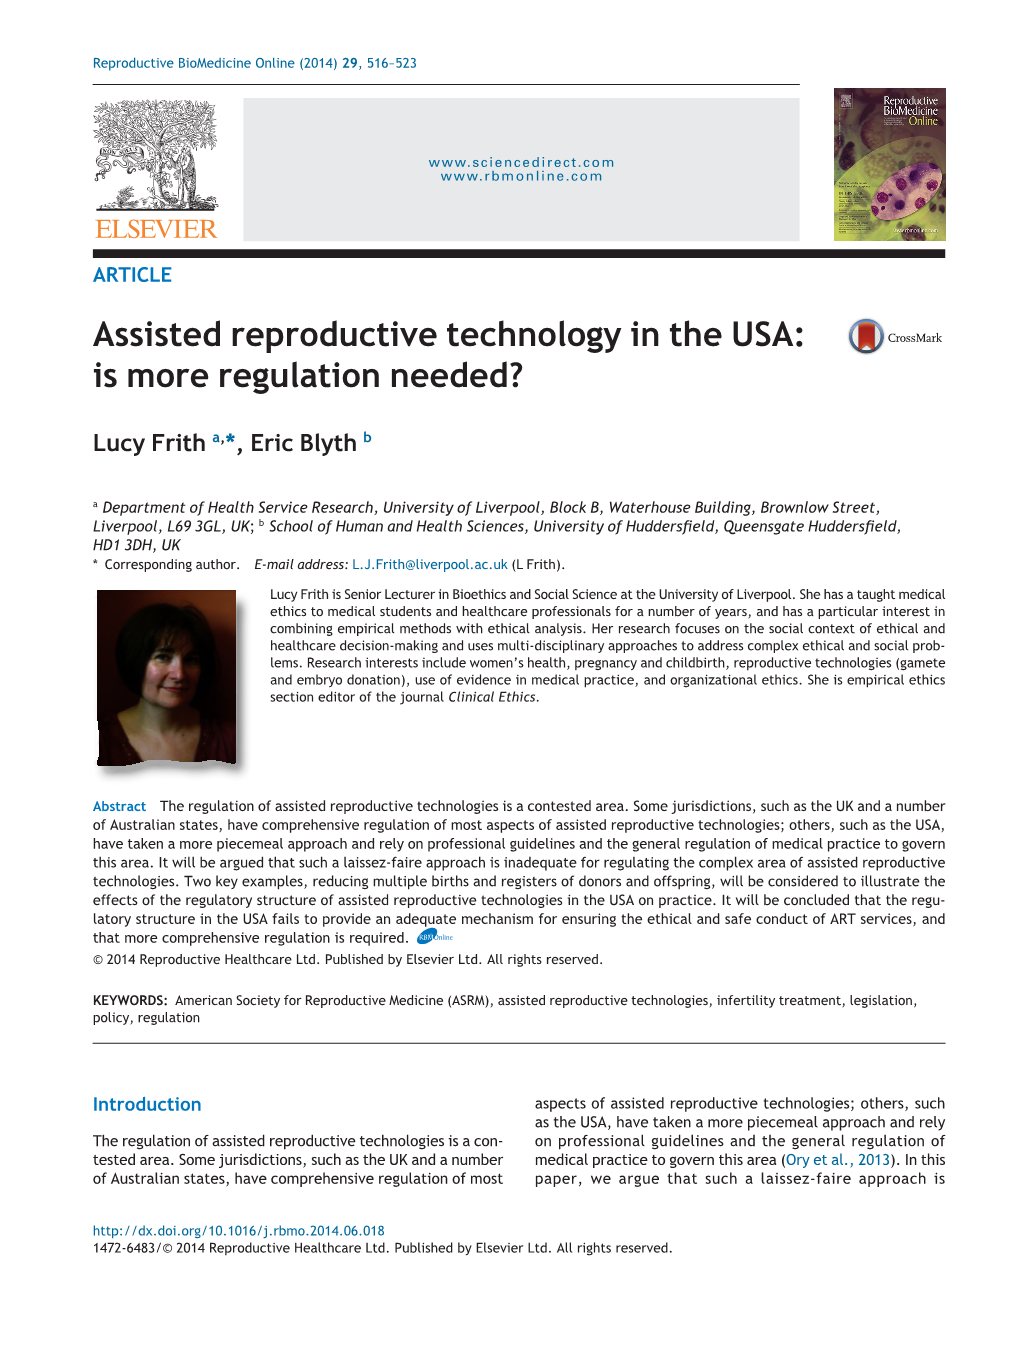 Assisted Reproductive Technology in the USA: Is More Regulation Needed?